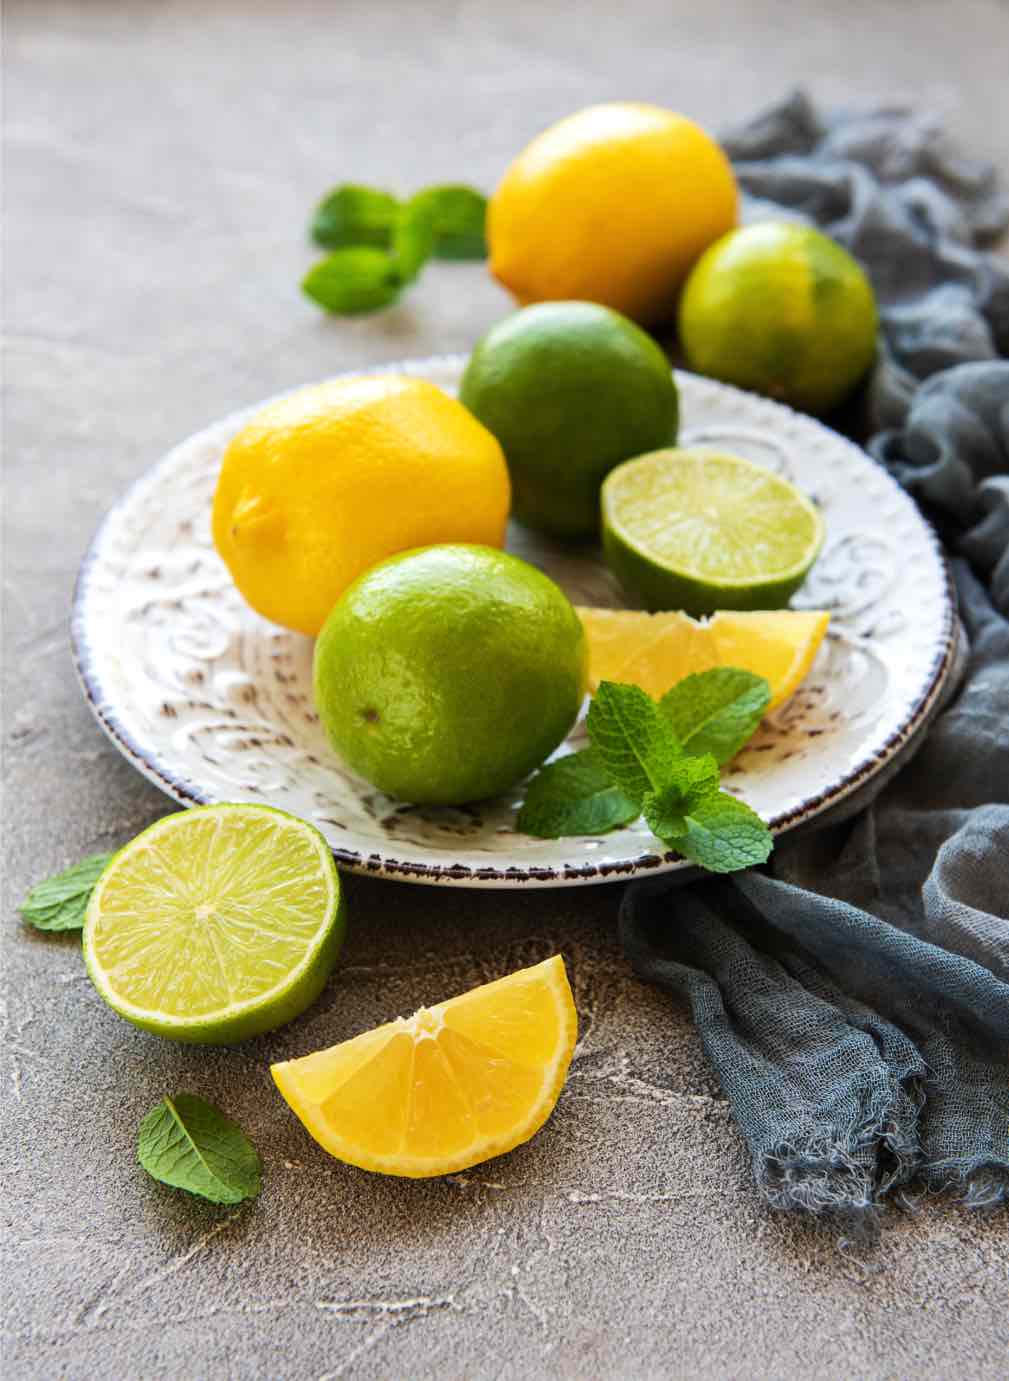 Lemons and limes are great for humans, but not for dogs - learn more with Dog Training Elite of the NC Triangle in Durham and Chapel Hill!